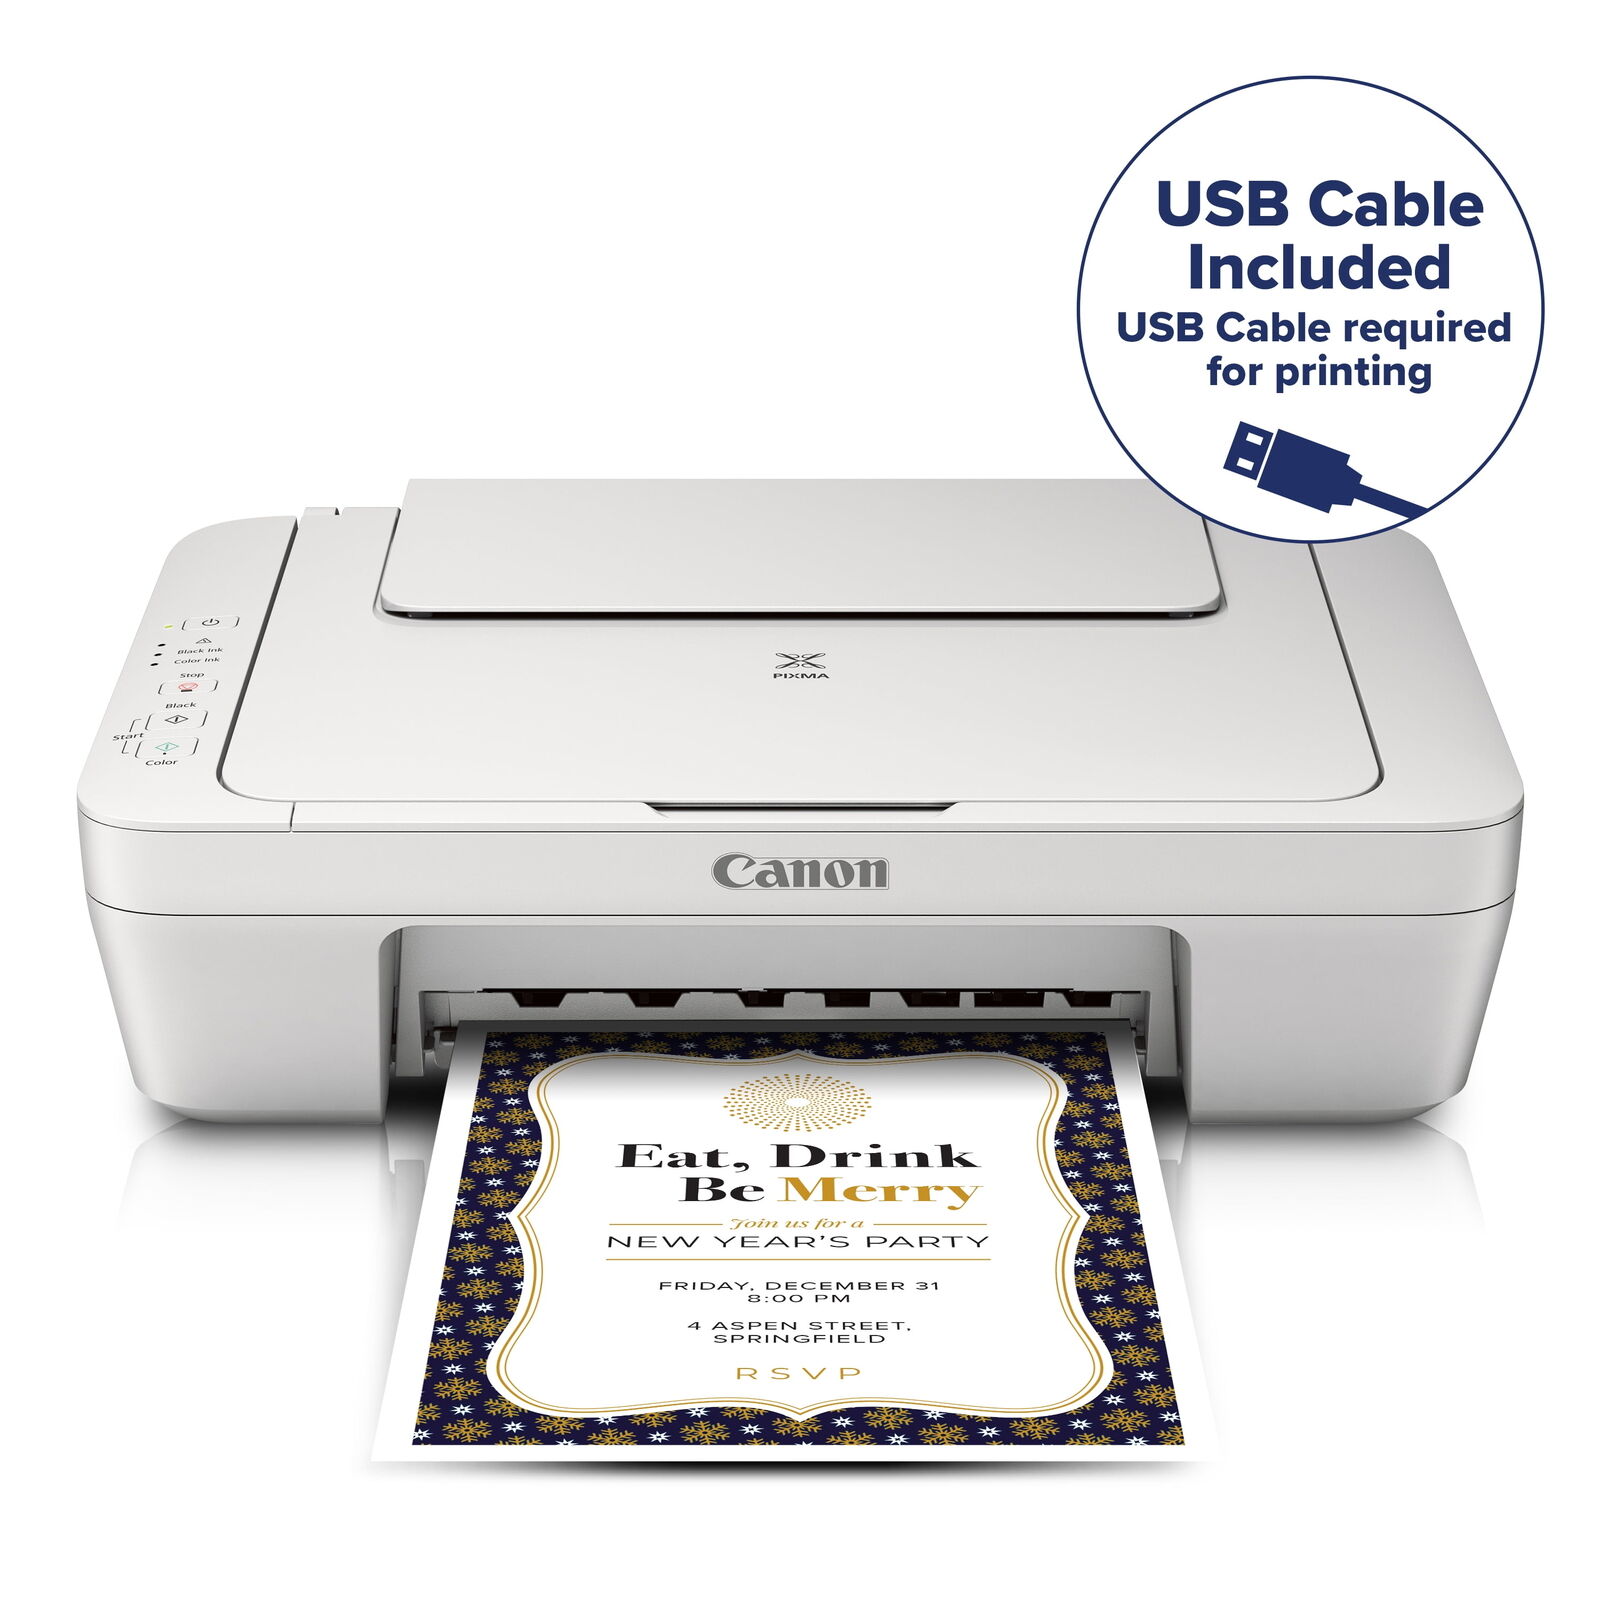 Canon PIXMA MG2522 Wired All-in-One Color Inkjet Printer [USB Cable Included]